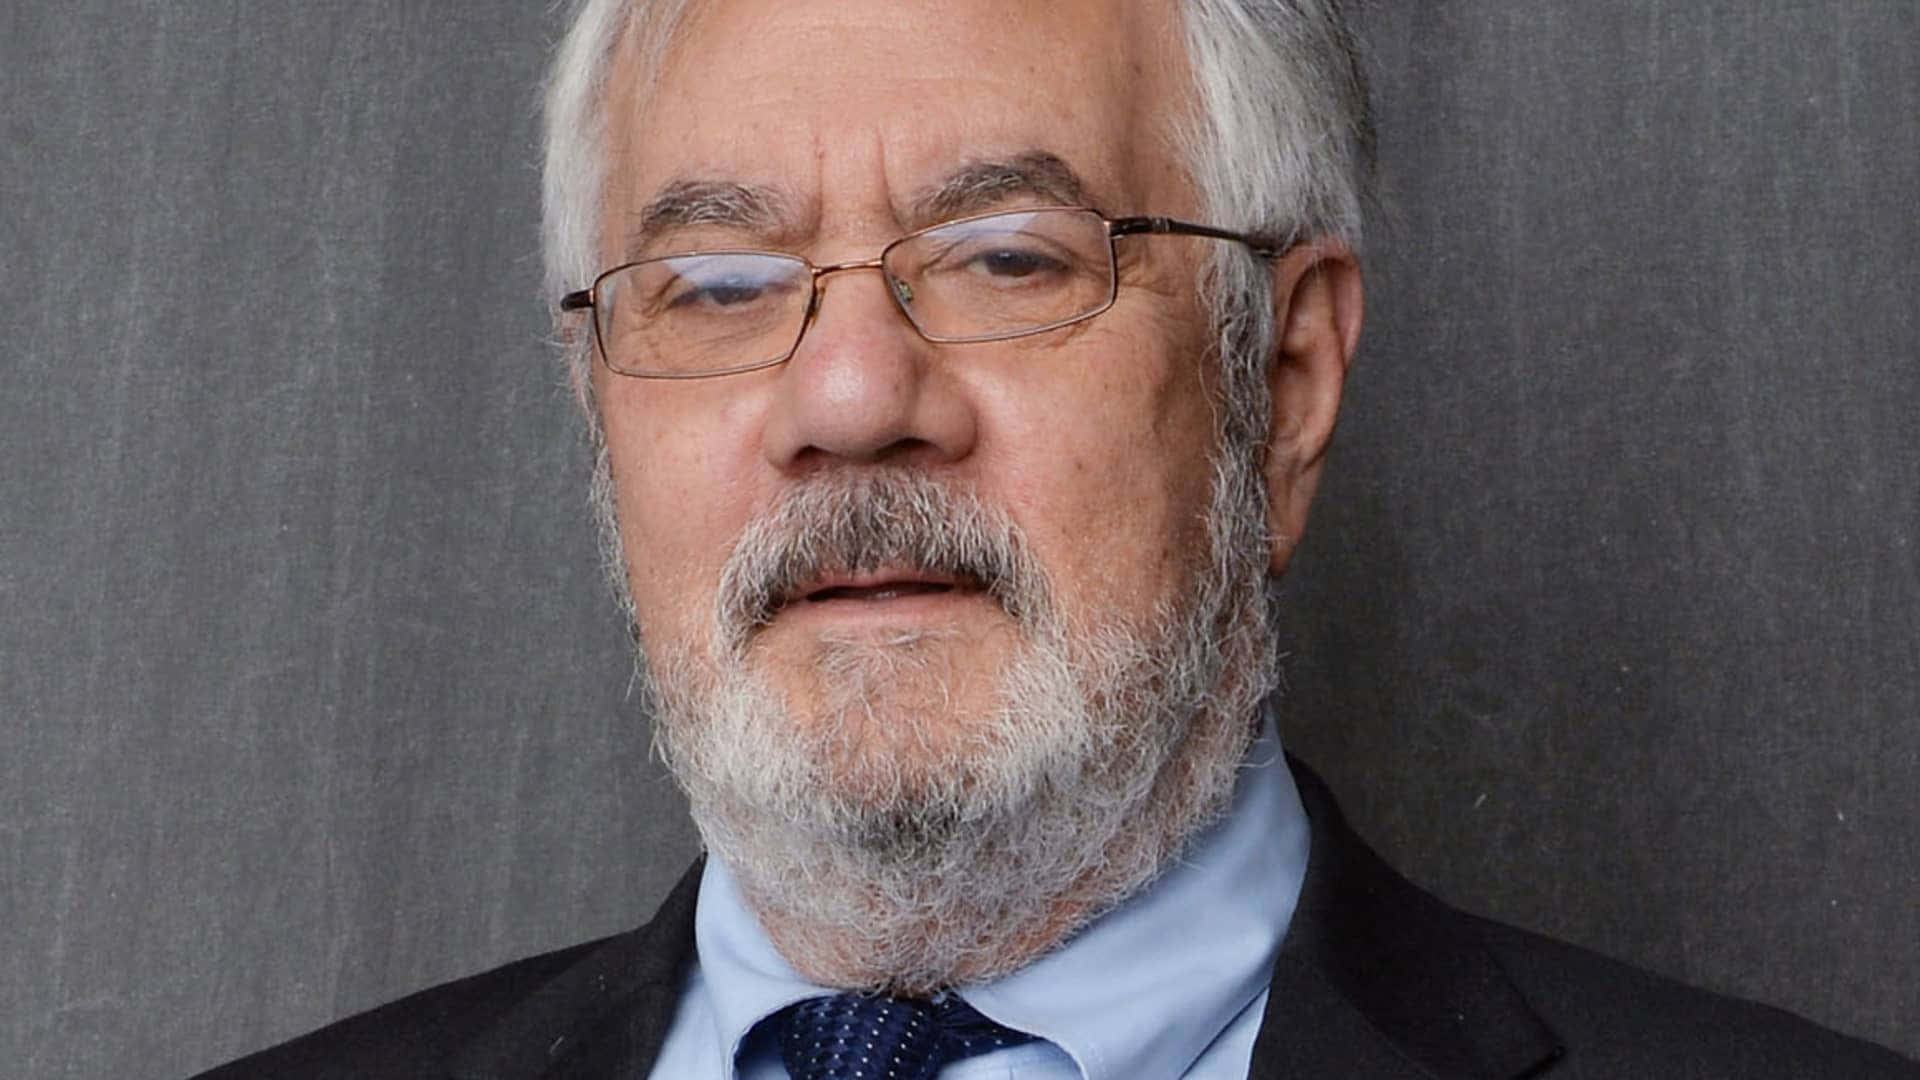 Prominent Politician Barney Frank Against a Gray Background Wallpaper